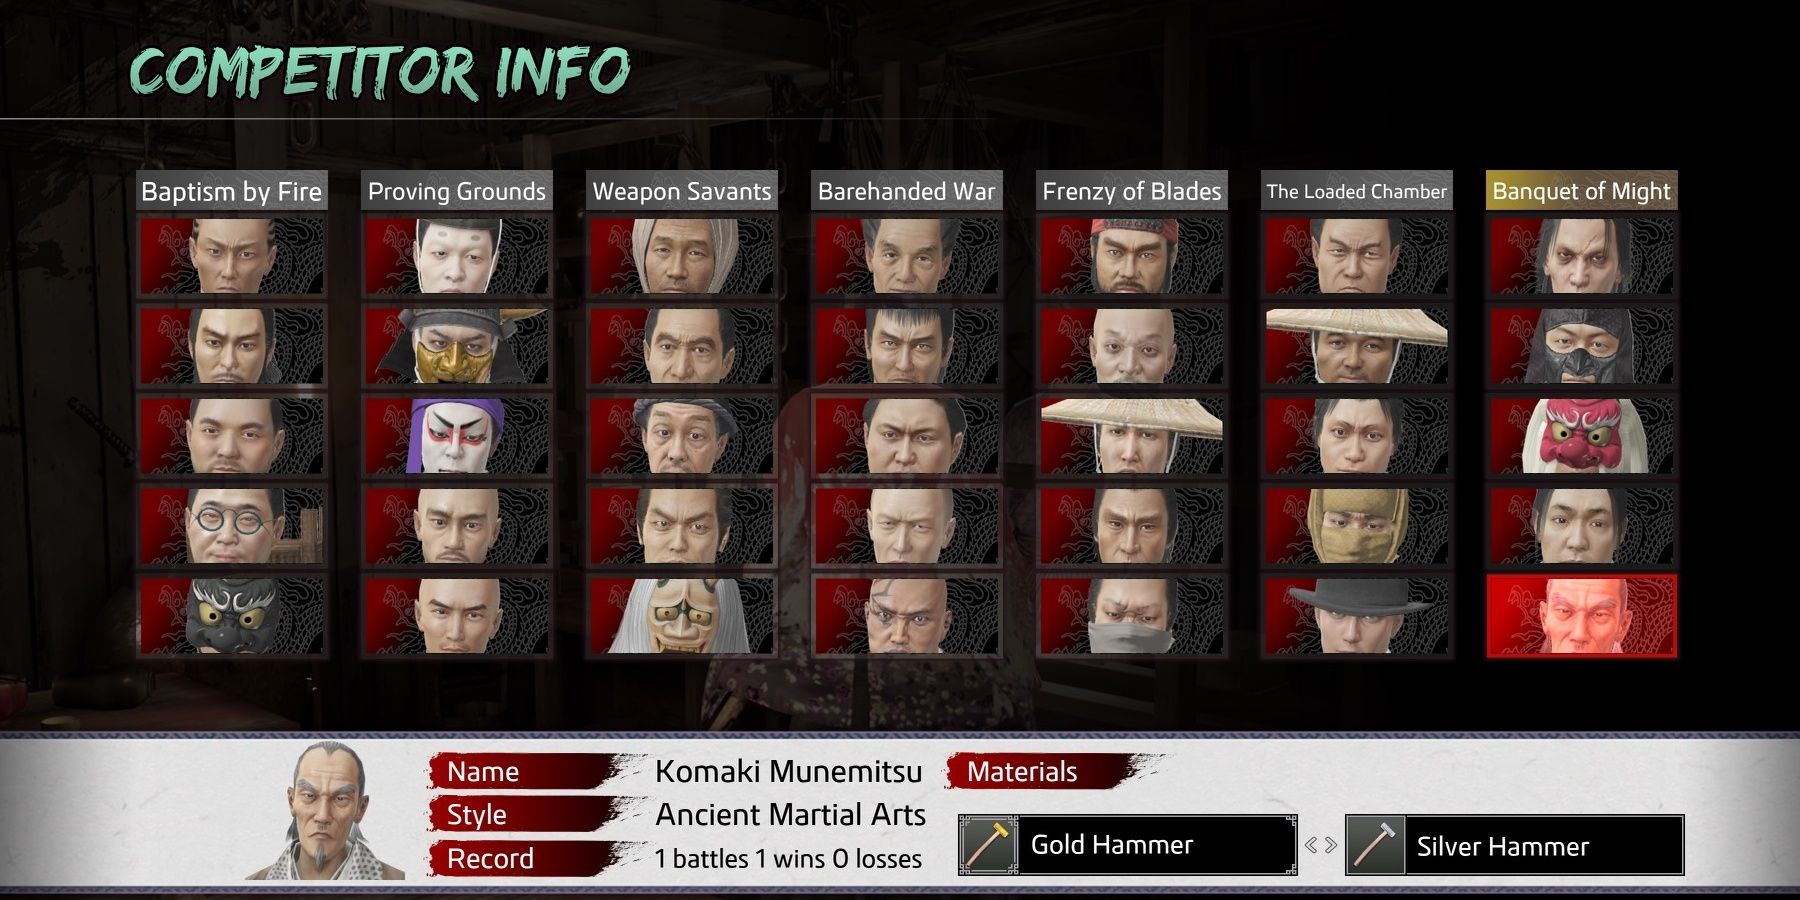 Every opponent's face listed in The Arena, including Komaki Munemitsu.